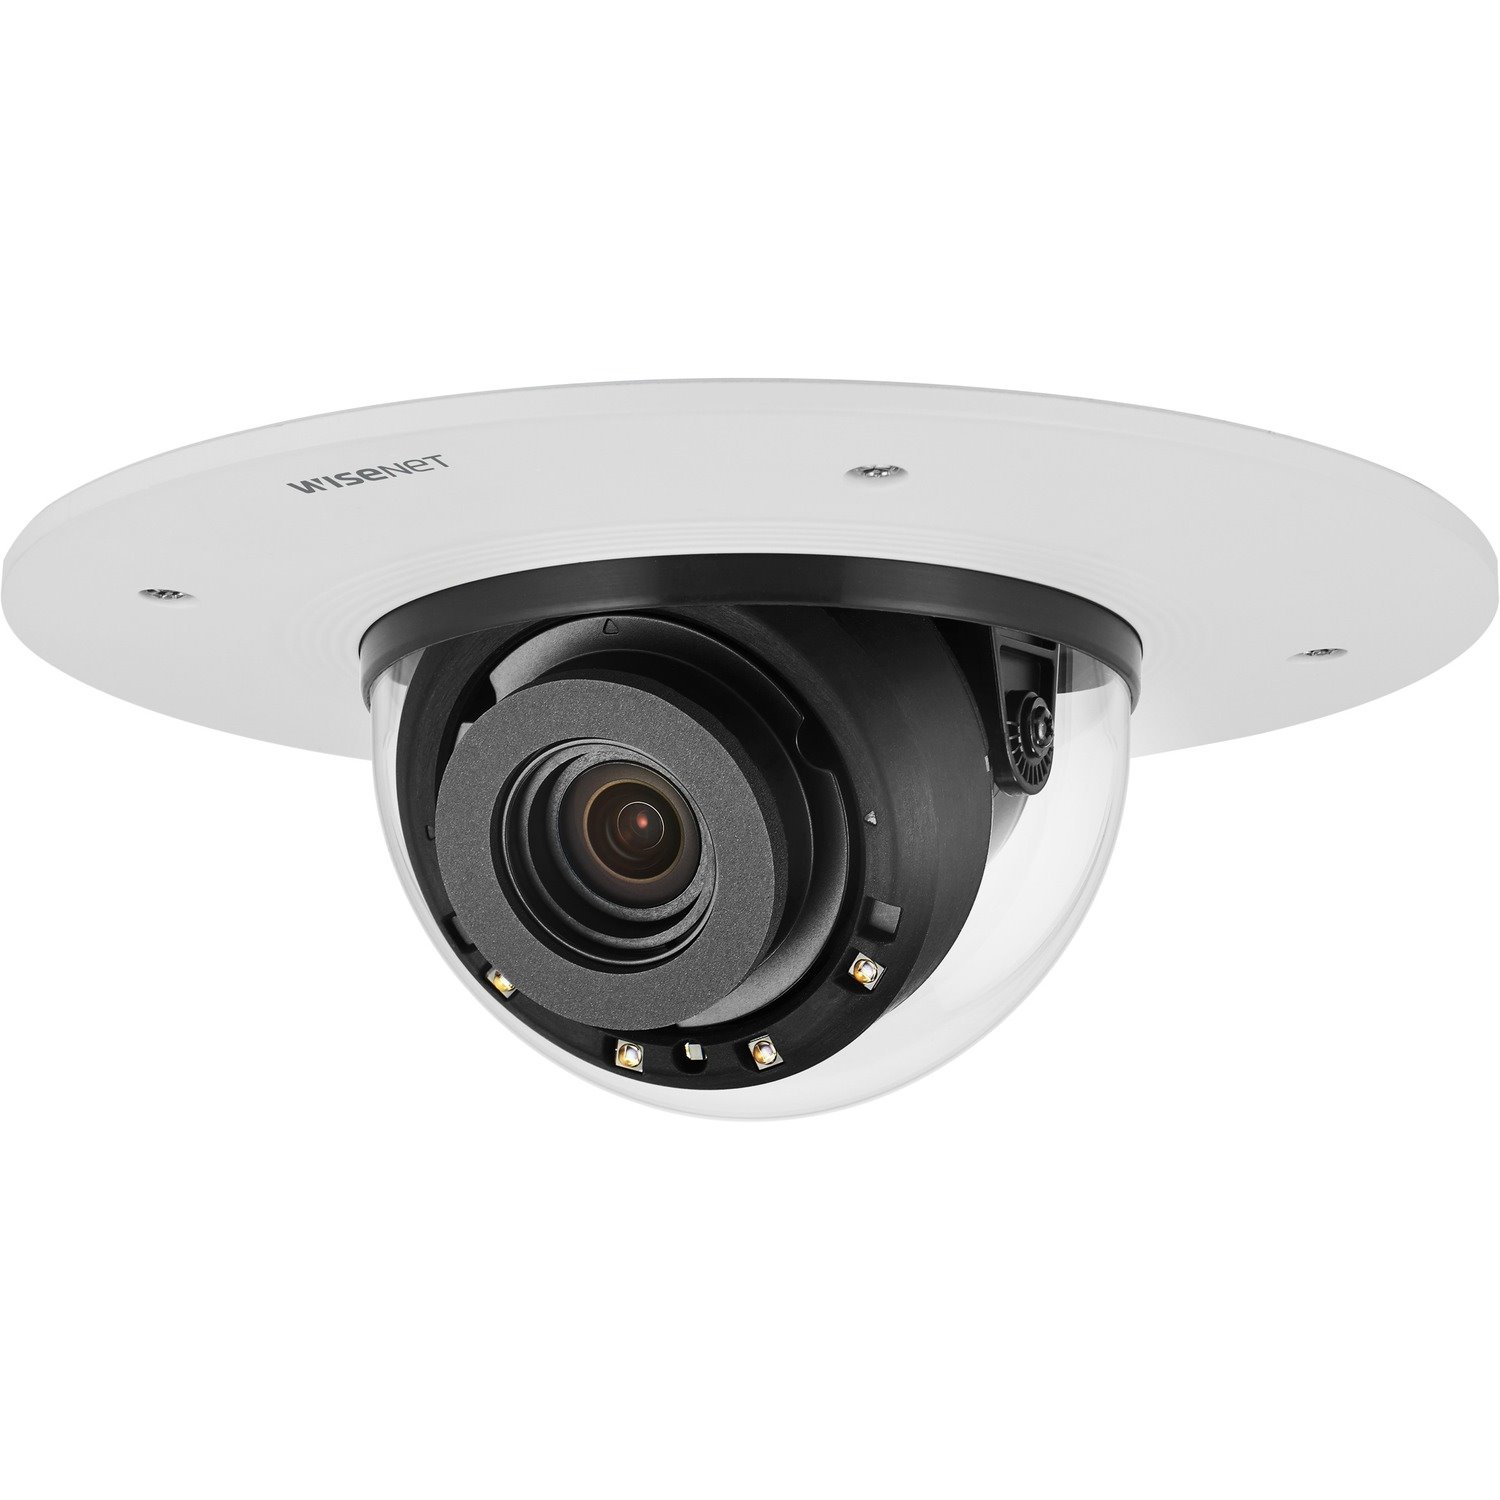 Hanwha Techwin PND-A9081RF 8 Megapixel Indoor 4K Network Camera - Color - Dome - White